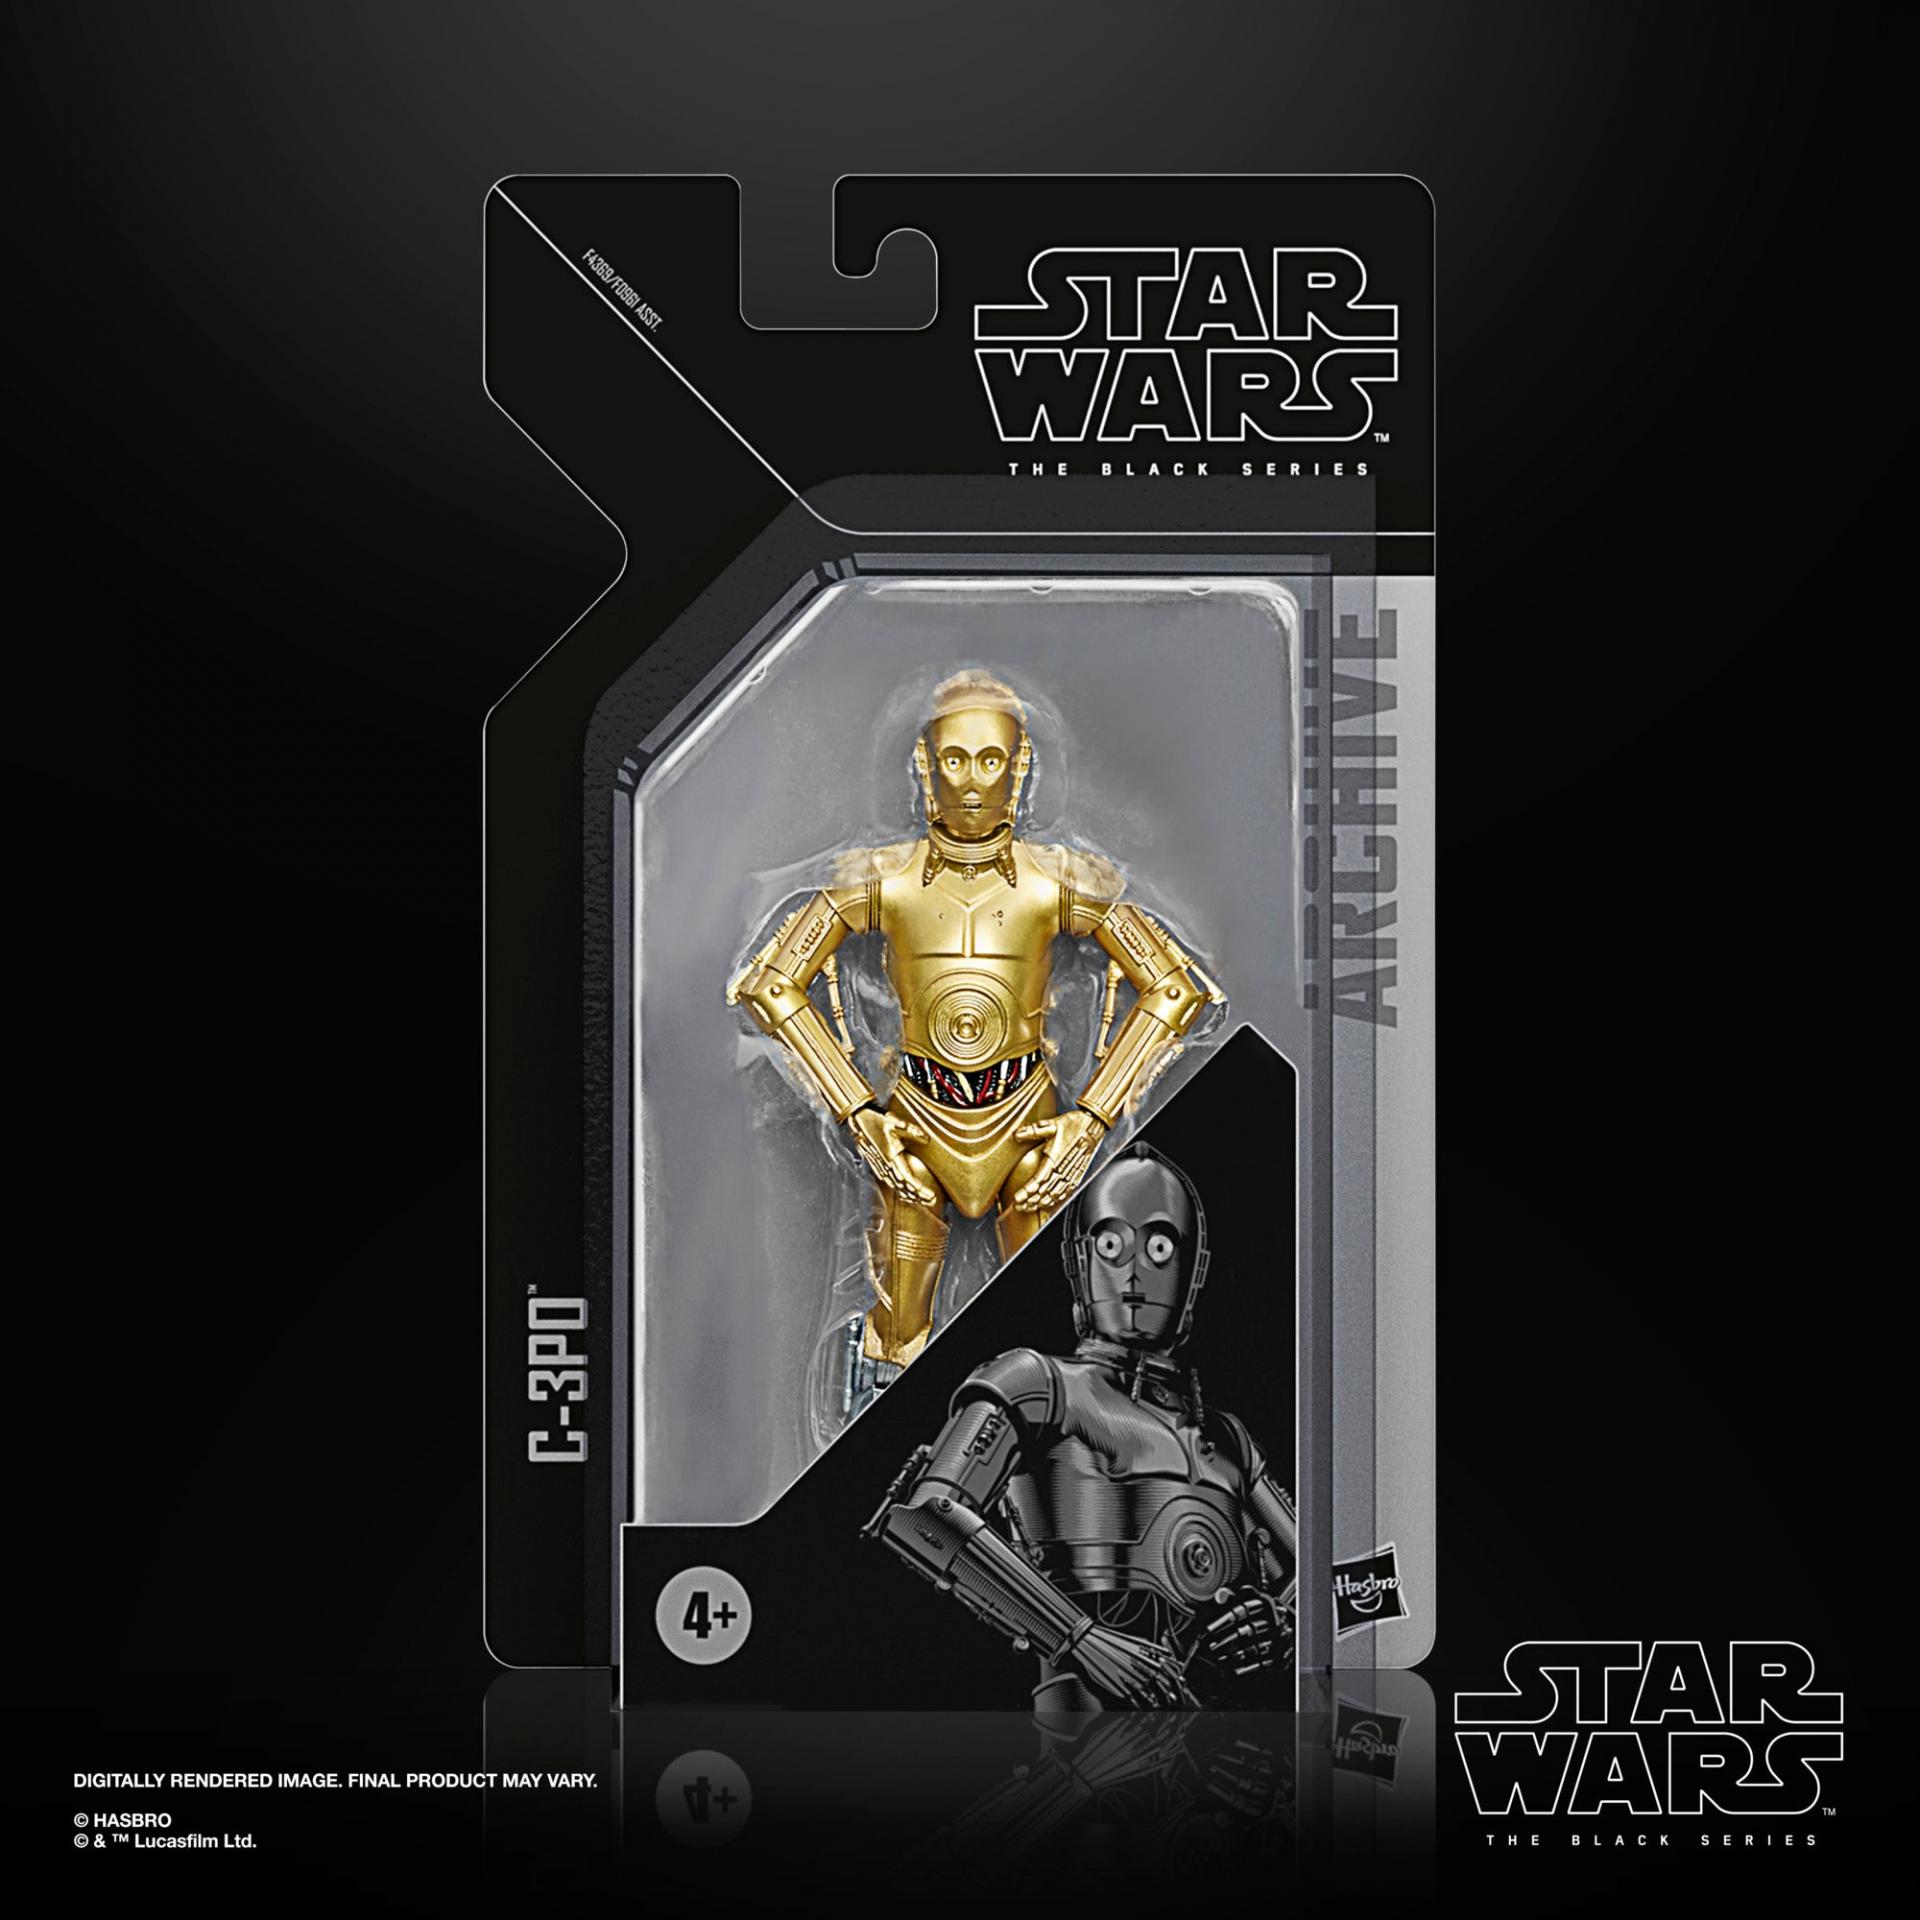 Star wars the black series archive c 3po 15cm jawascave 1